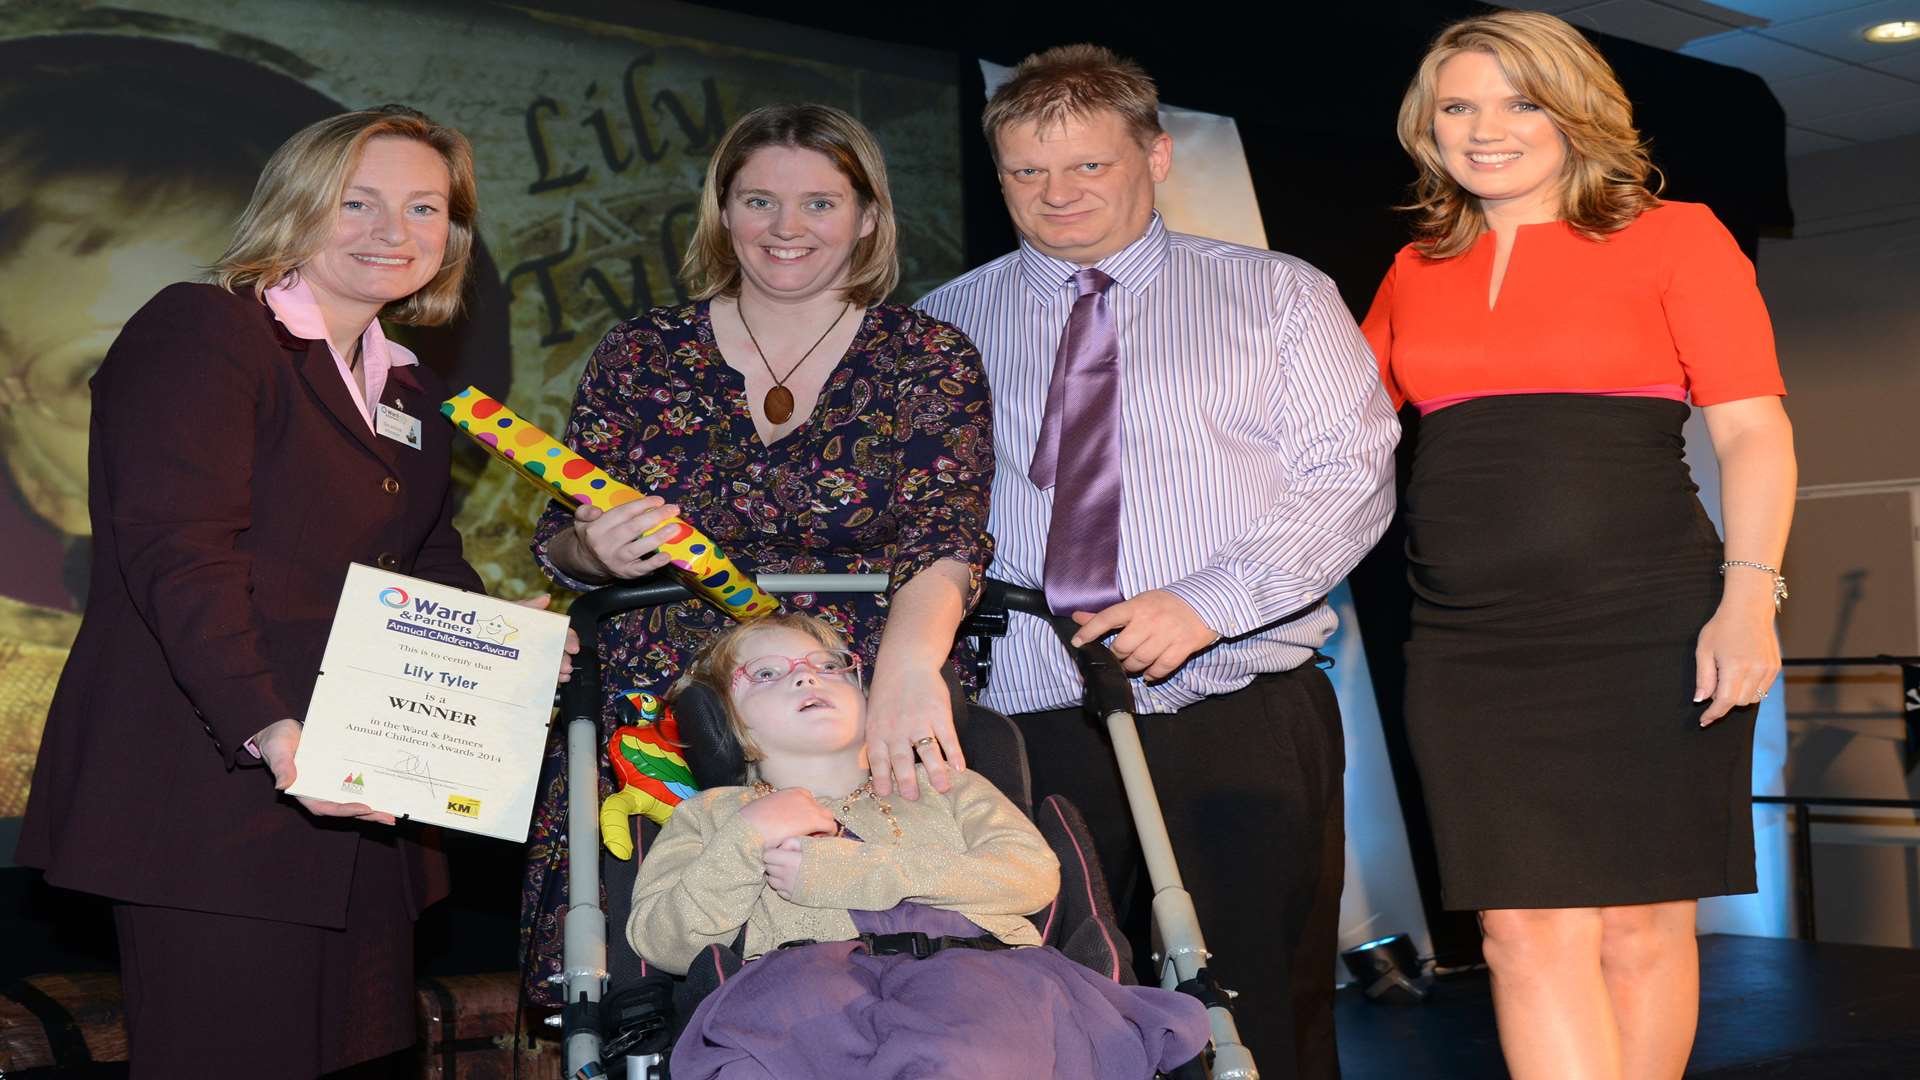 Lily Tyler who won last year’s Triumph Over Adversity Award with mum Andrena and dad Jonathan, presented by KM Group chairman, Geraldine Allinson and TV presenter, Charlotte Hawkins